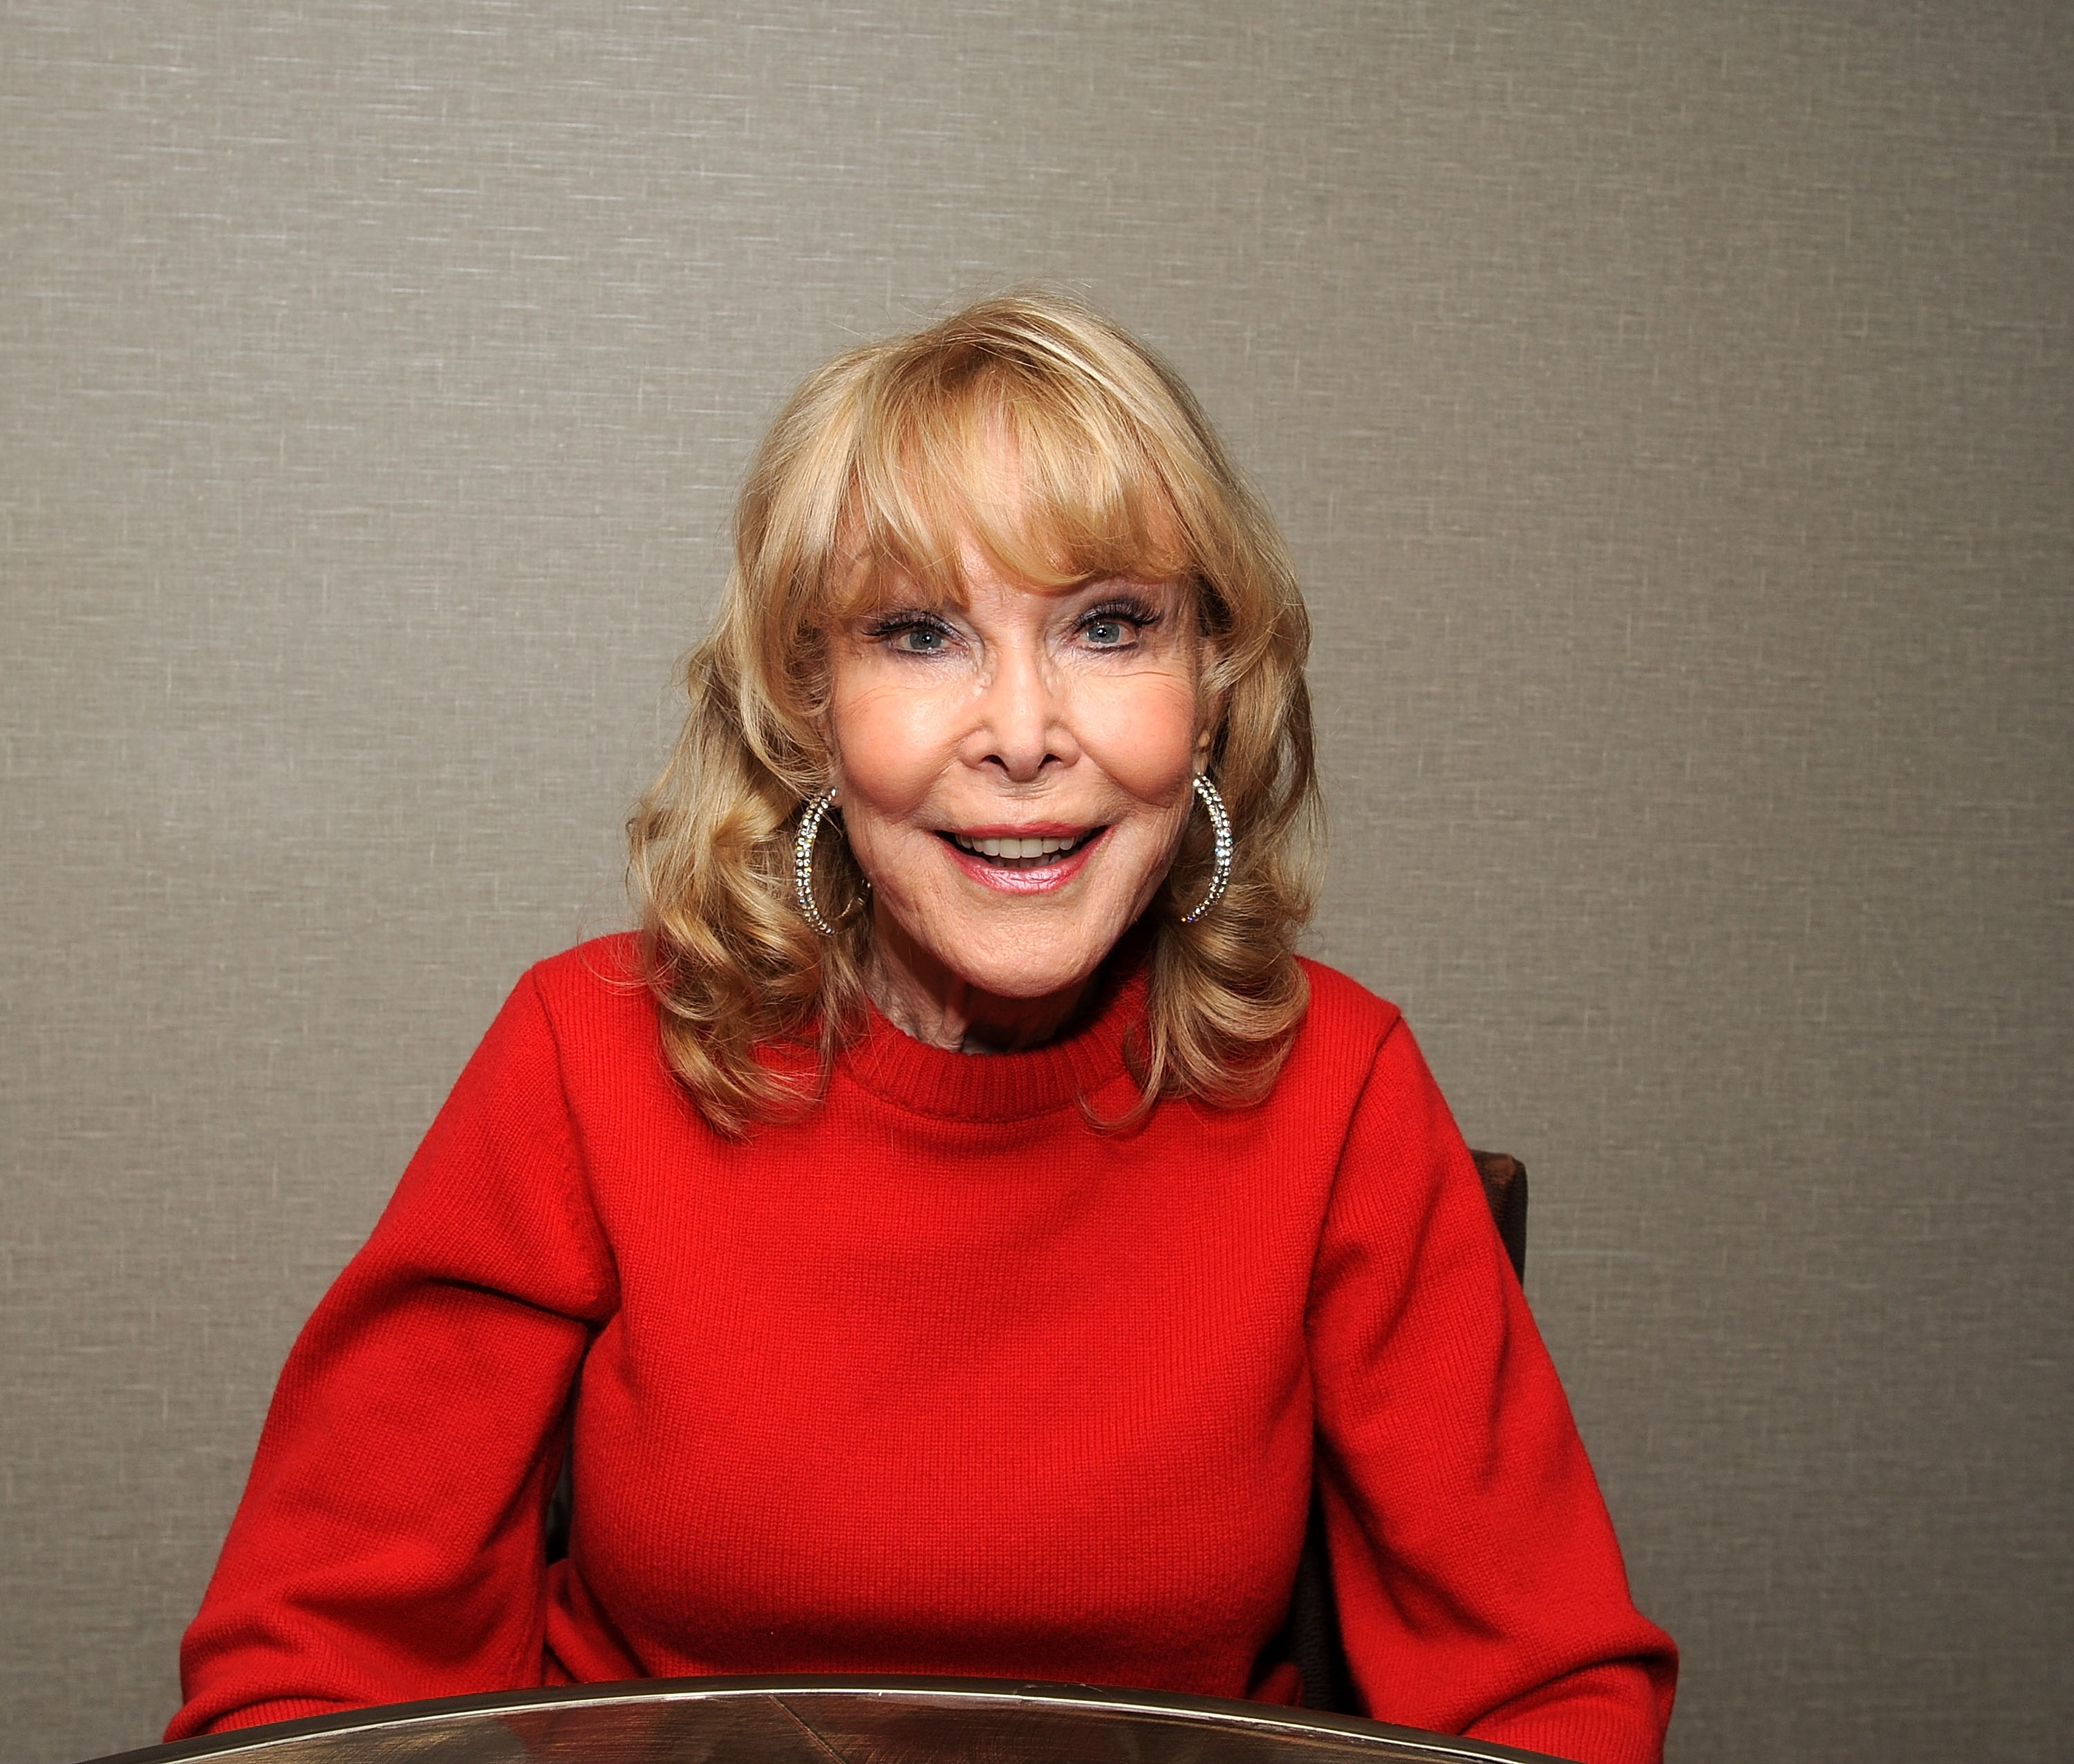 Barbara Eden besucht die Chiller Theatre Expo Fall 2018 im Hilton Parsippany am 26. Oktober 2018 in Parsippany, New Jersey | Quelle: Getty Images